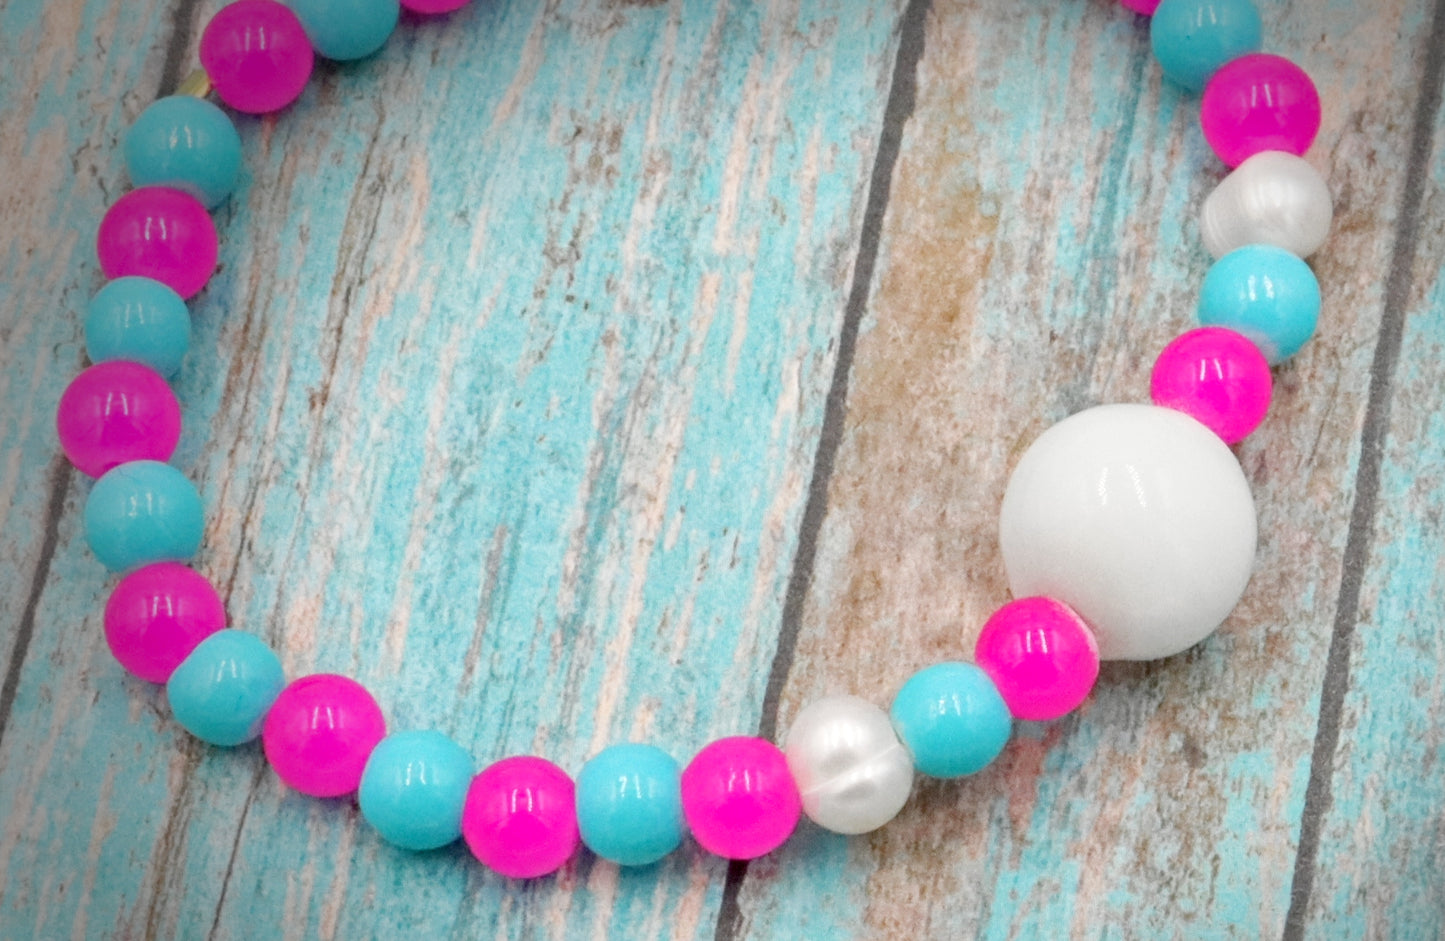 Hot Pink & Turquoise Blue Artisan Glass Beads & Cultured Pearl Bracelet by Monkeys Mojo